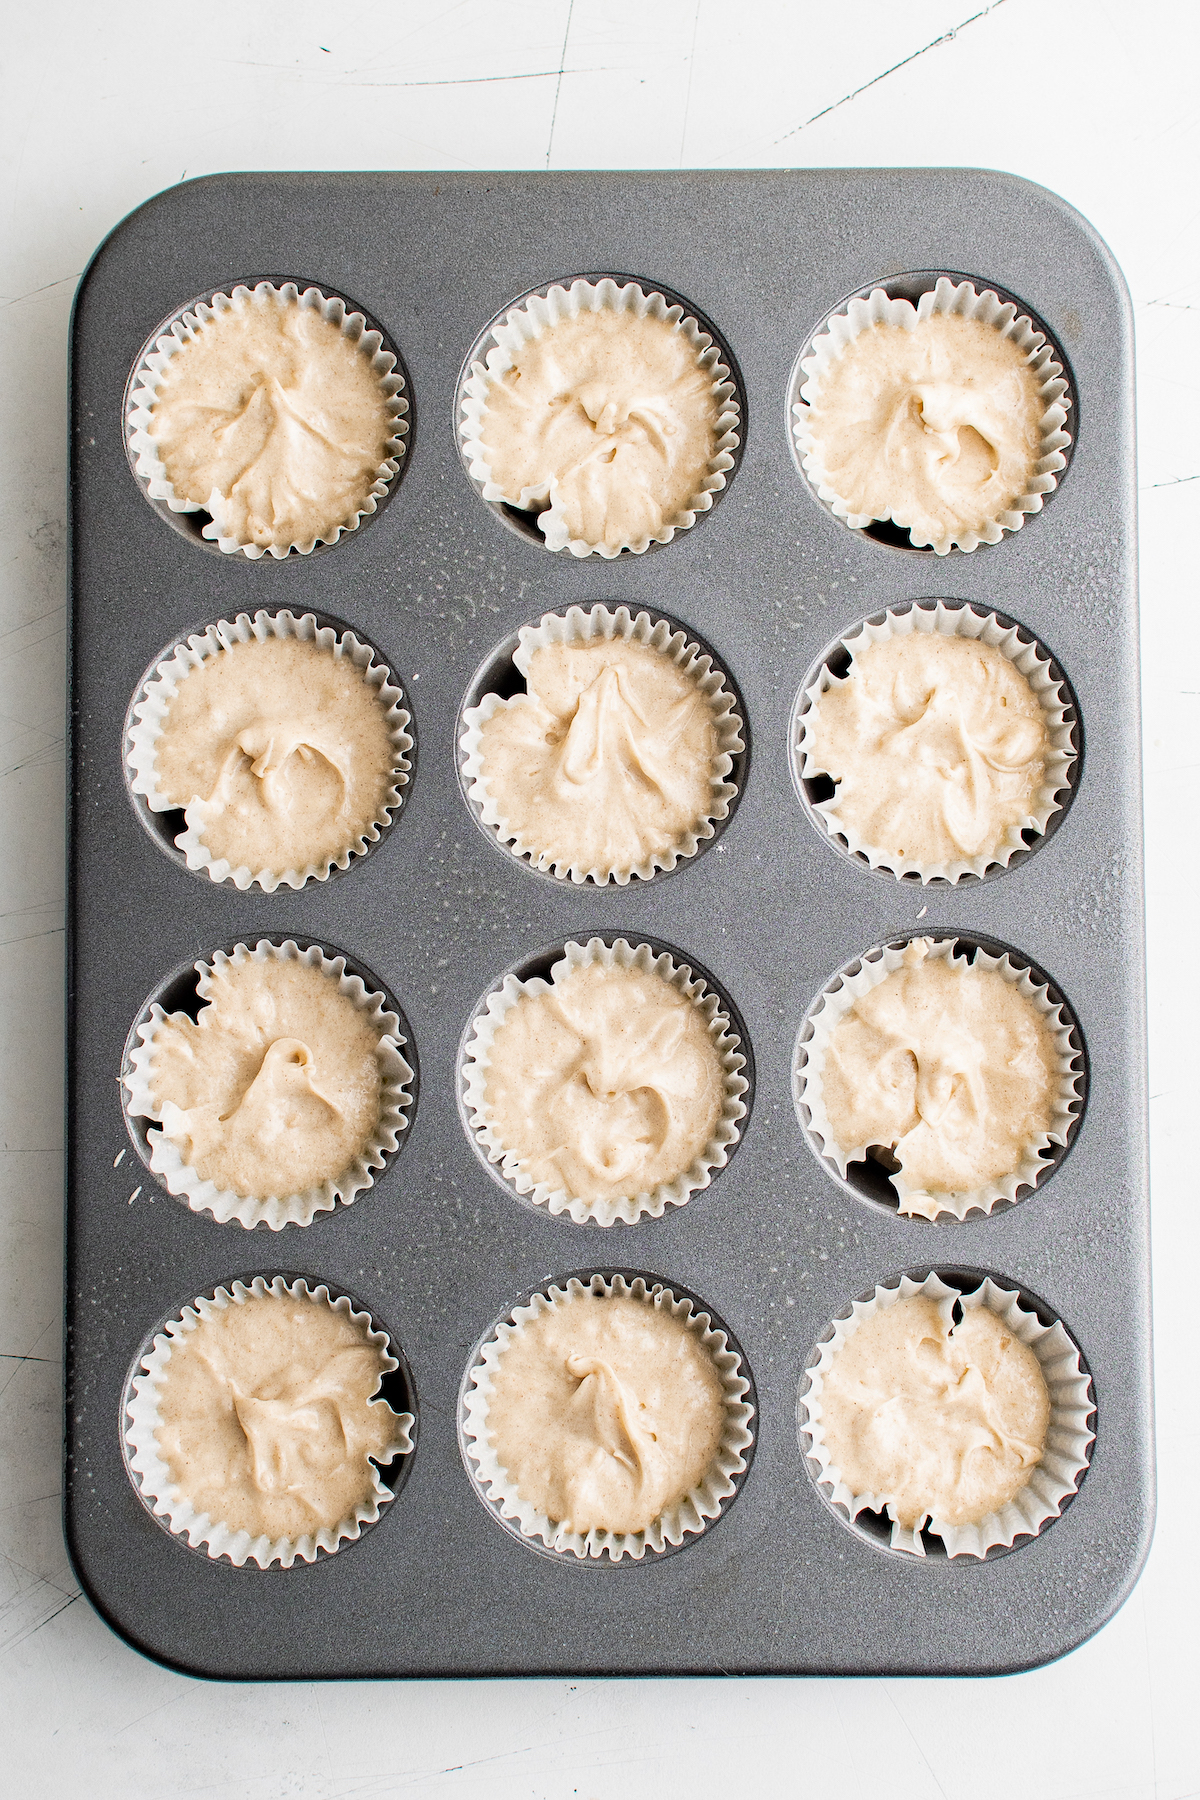 Unbaked cupcake batter, in a muffin tin lined with cupcake liners.